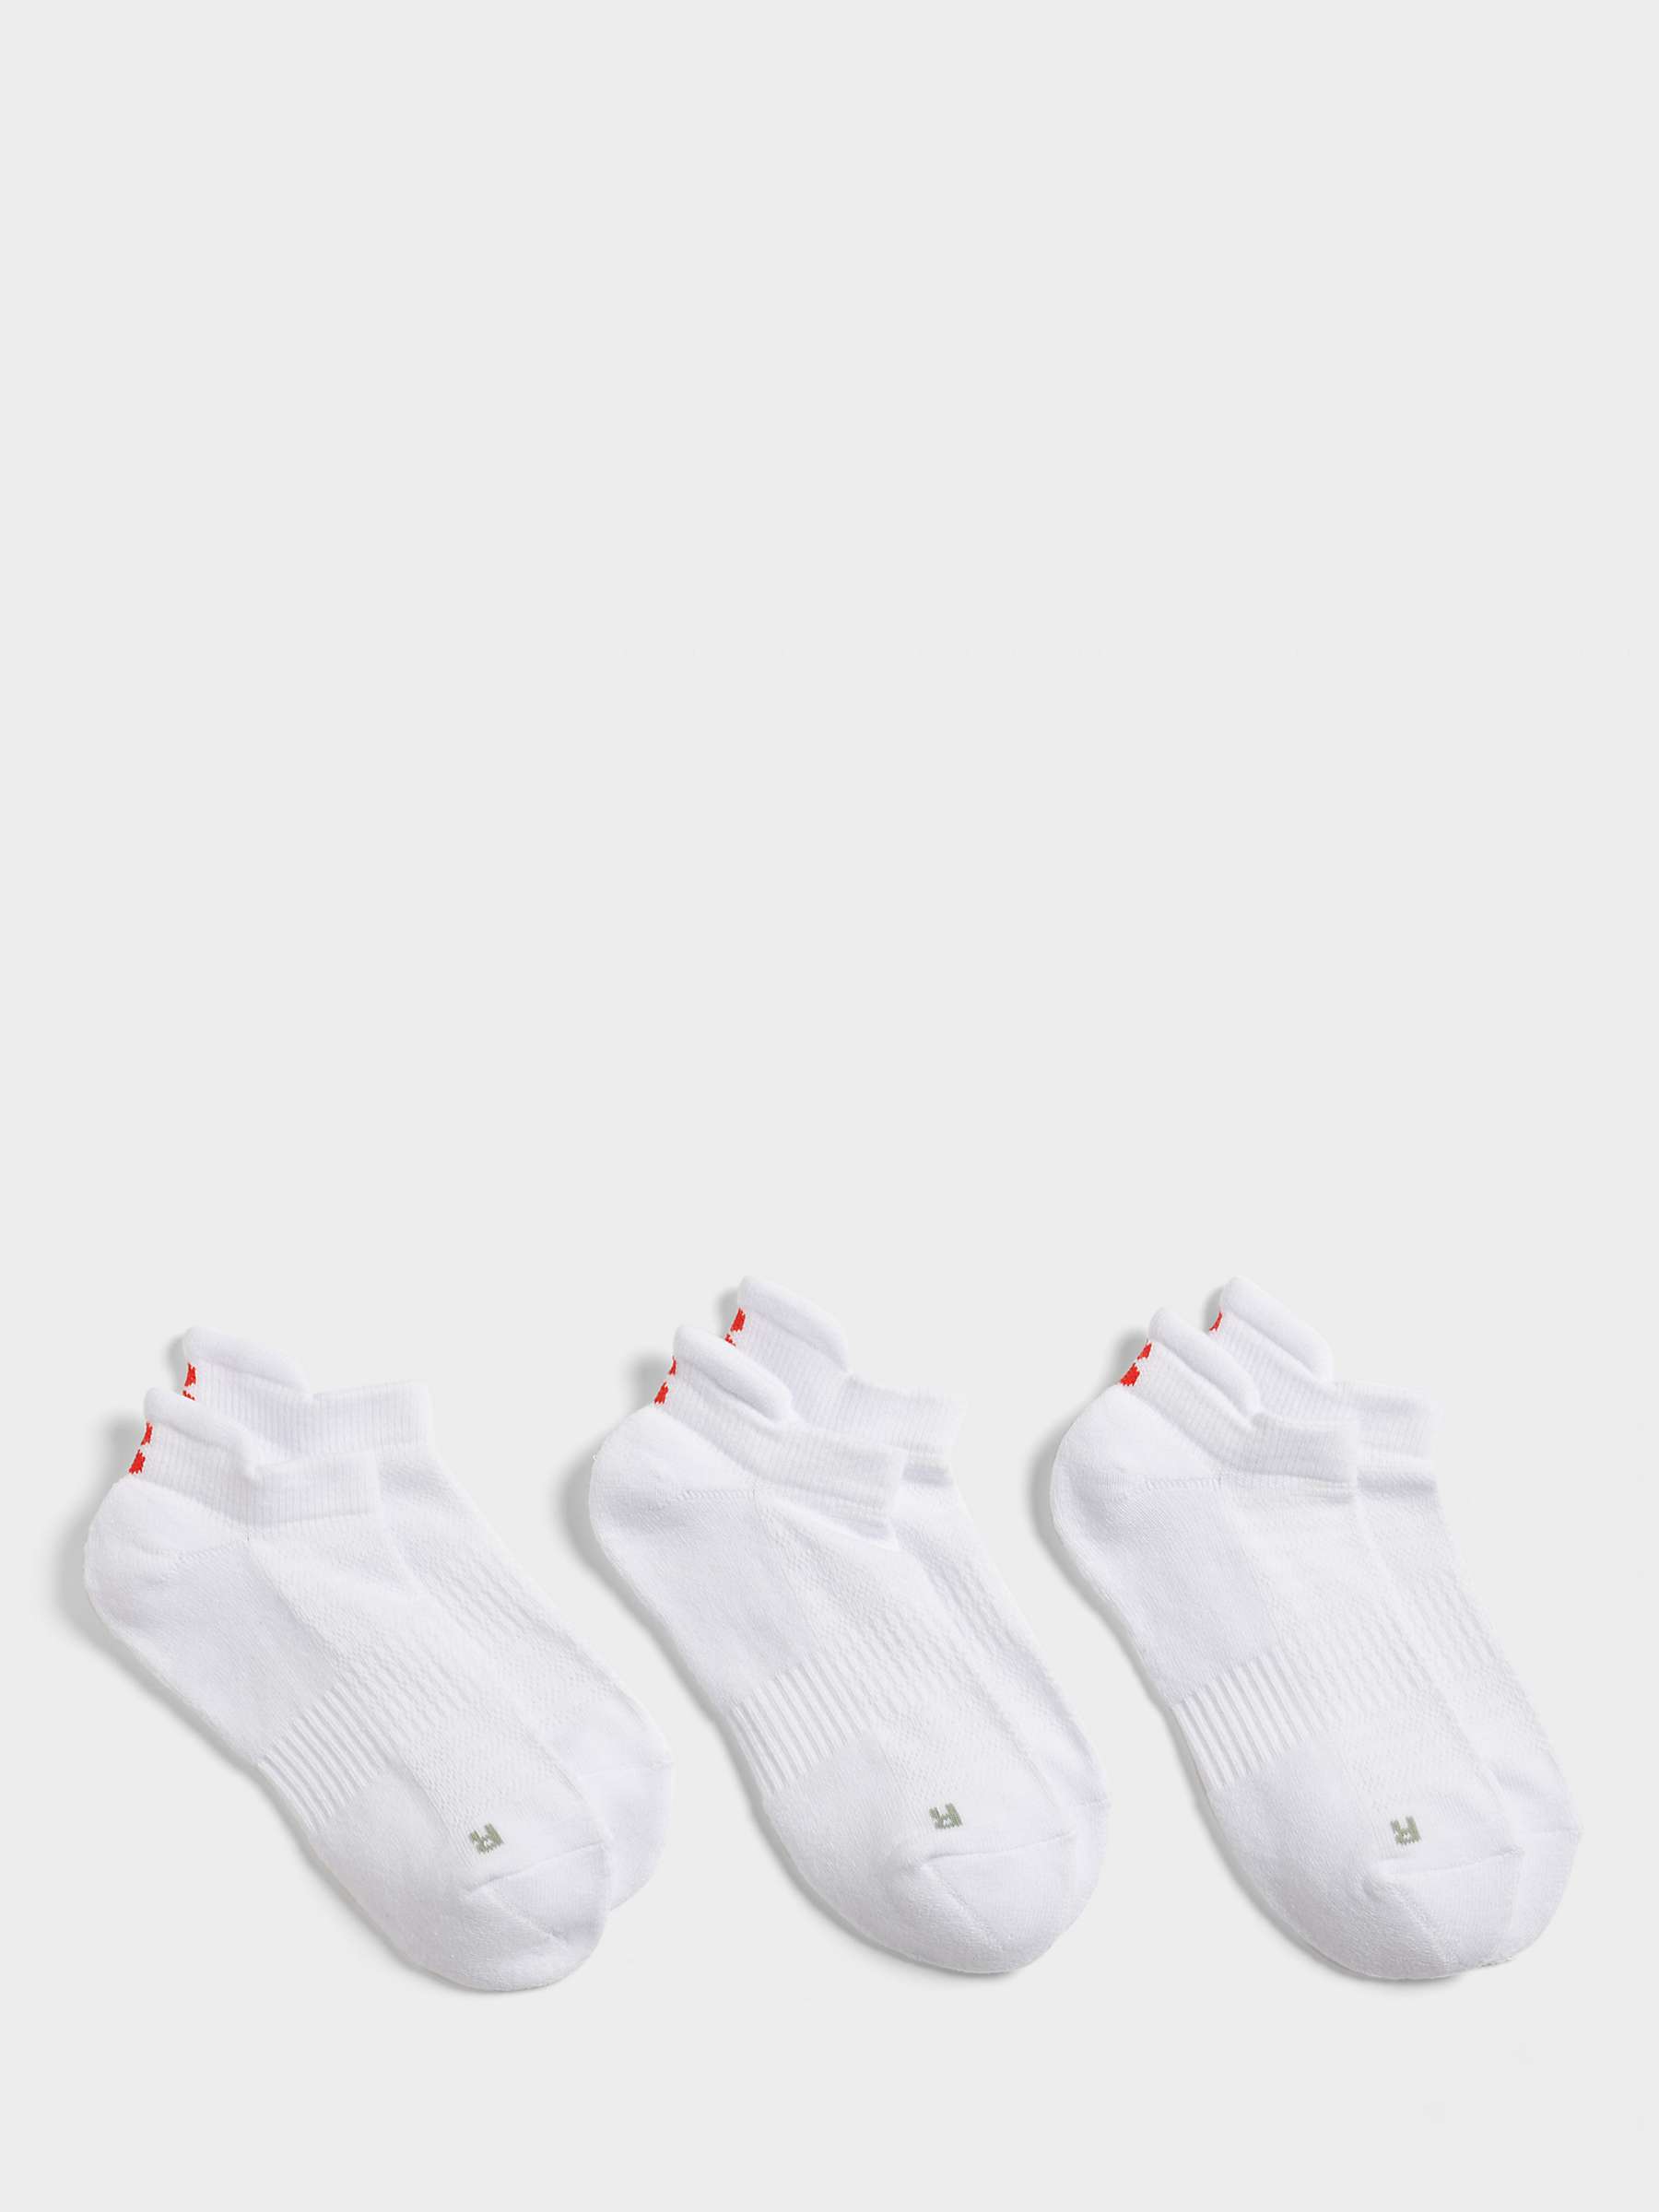 Buy Sweaty Betty Workout Socks, Pack of 3, White Online at johnlewis.com